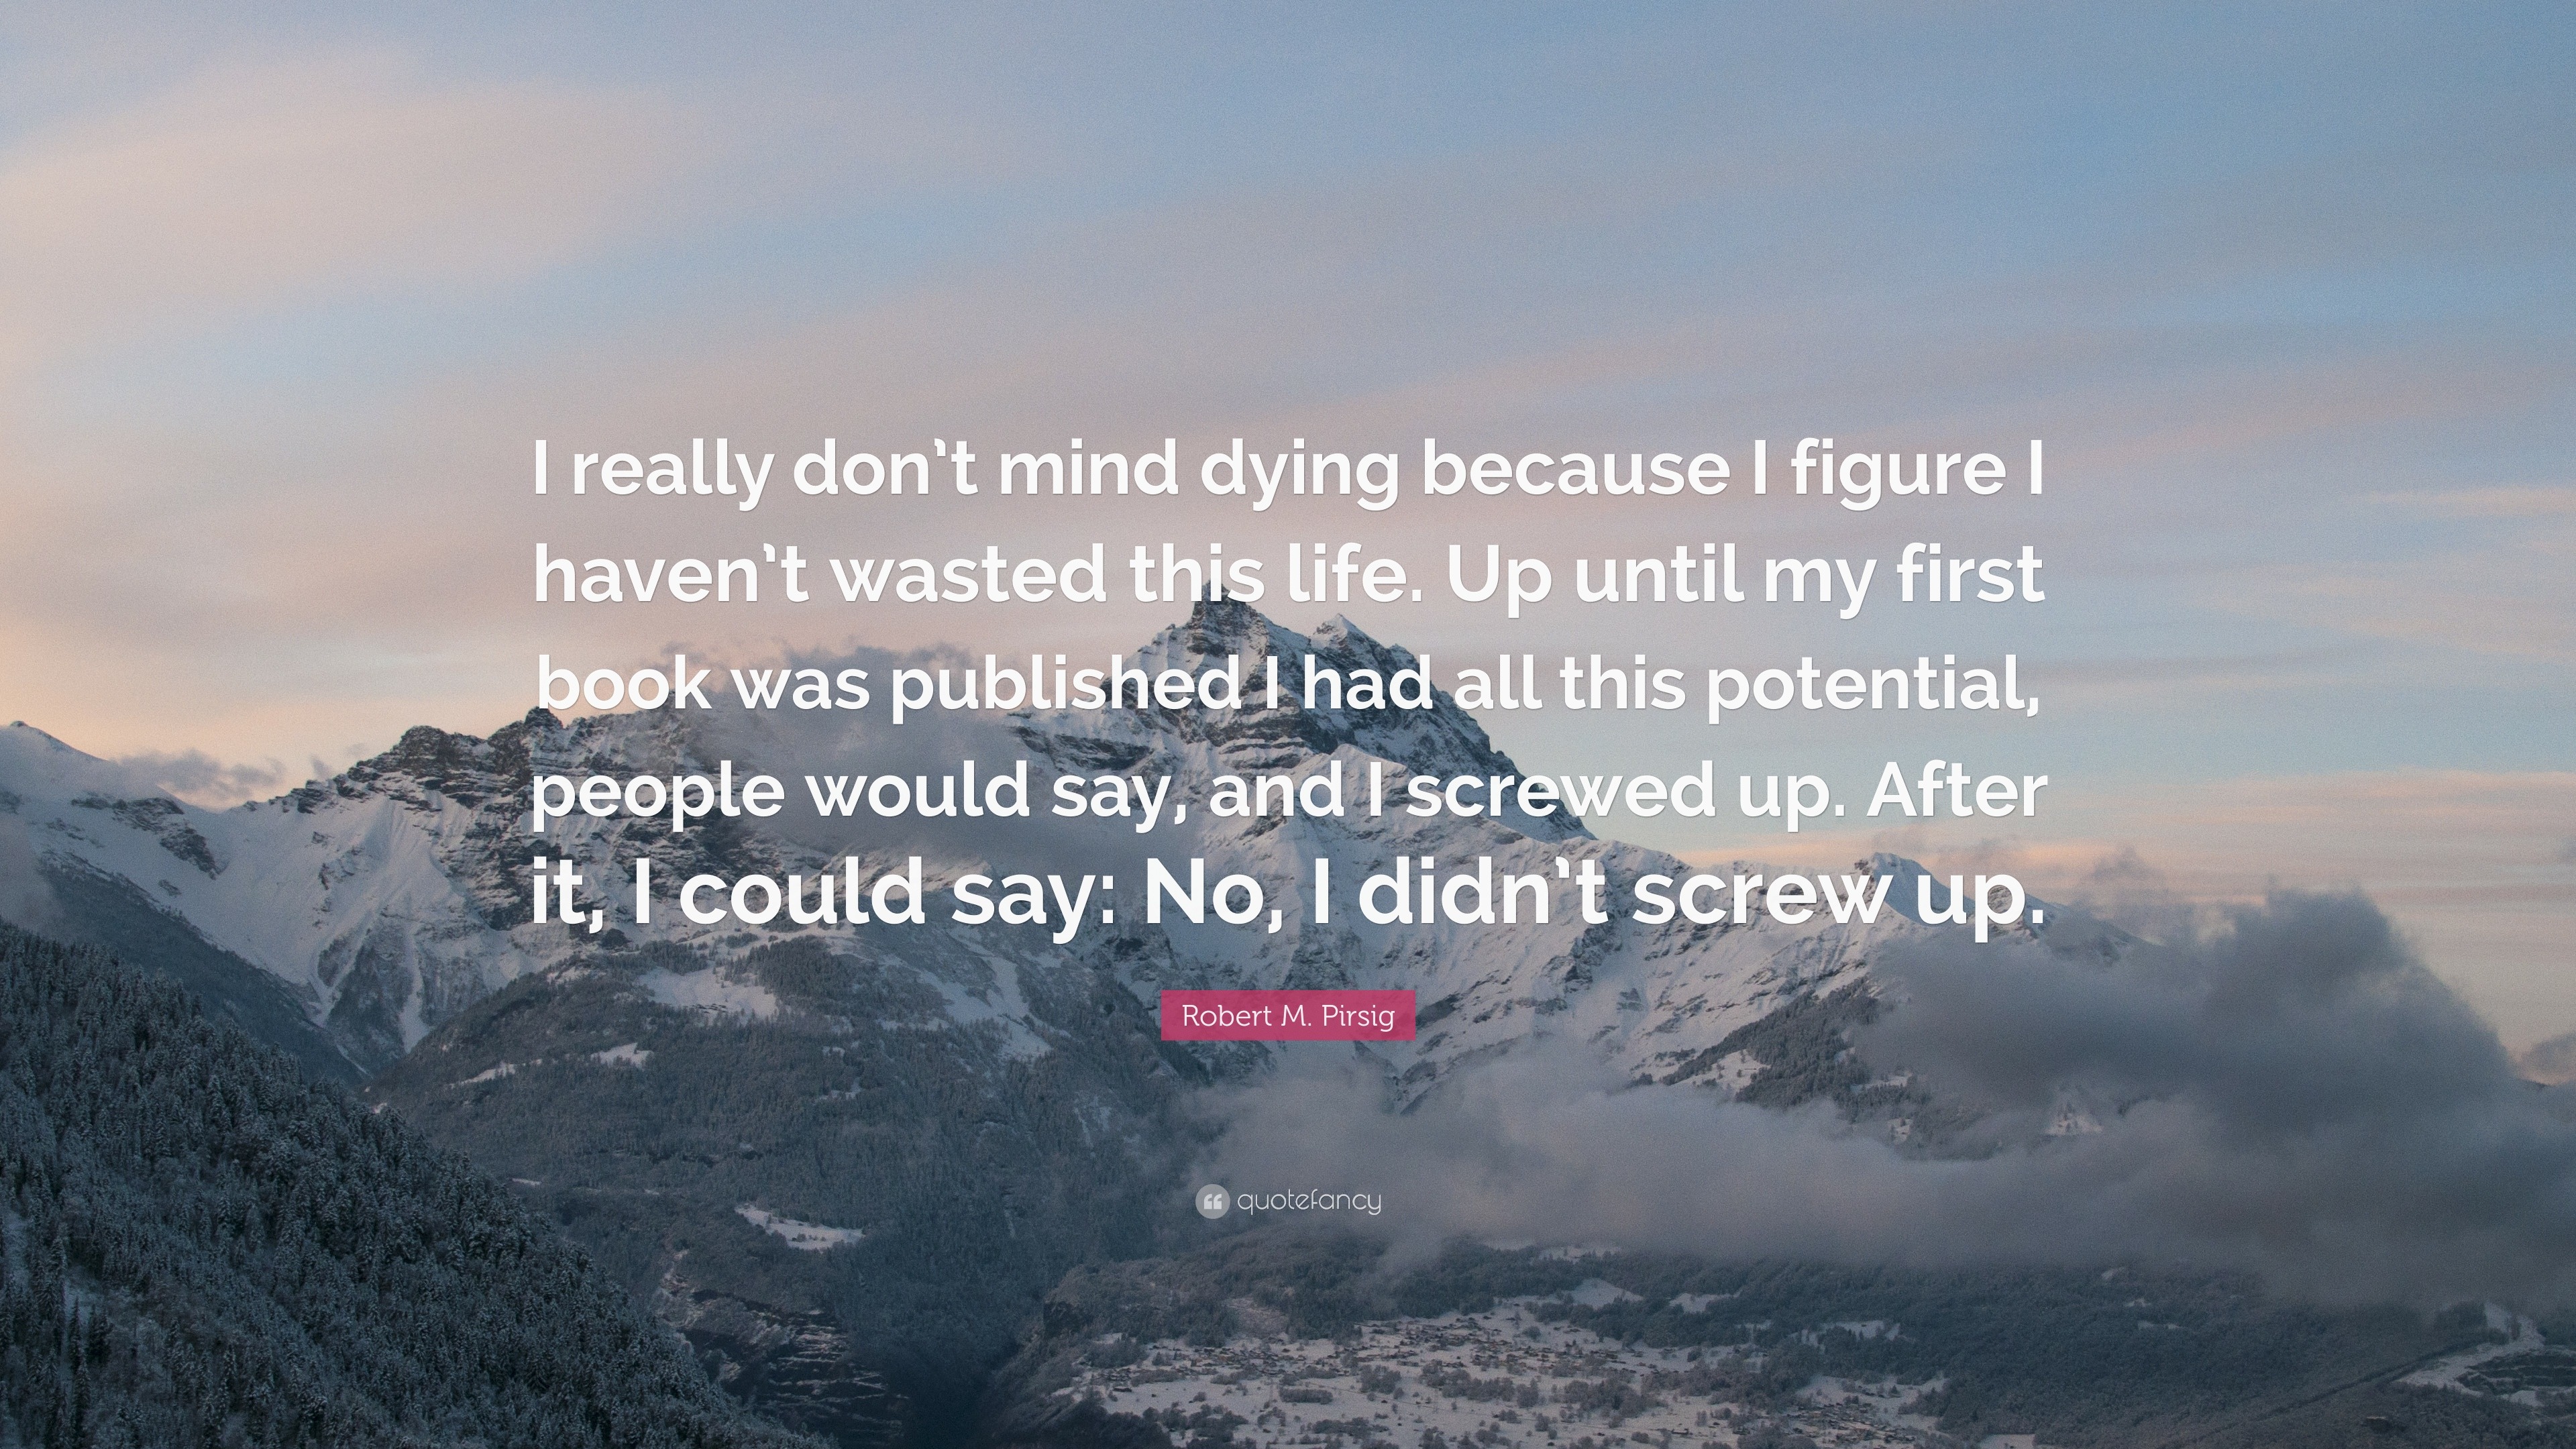 Robert M. Pirsig Quote: “I really don’t mind dying because I figure I ...